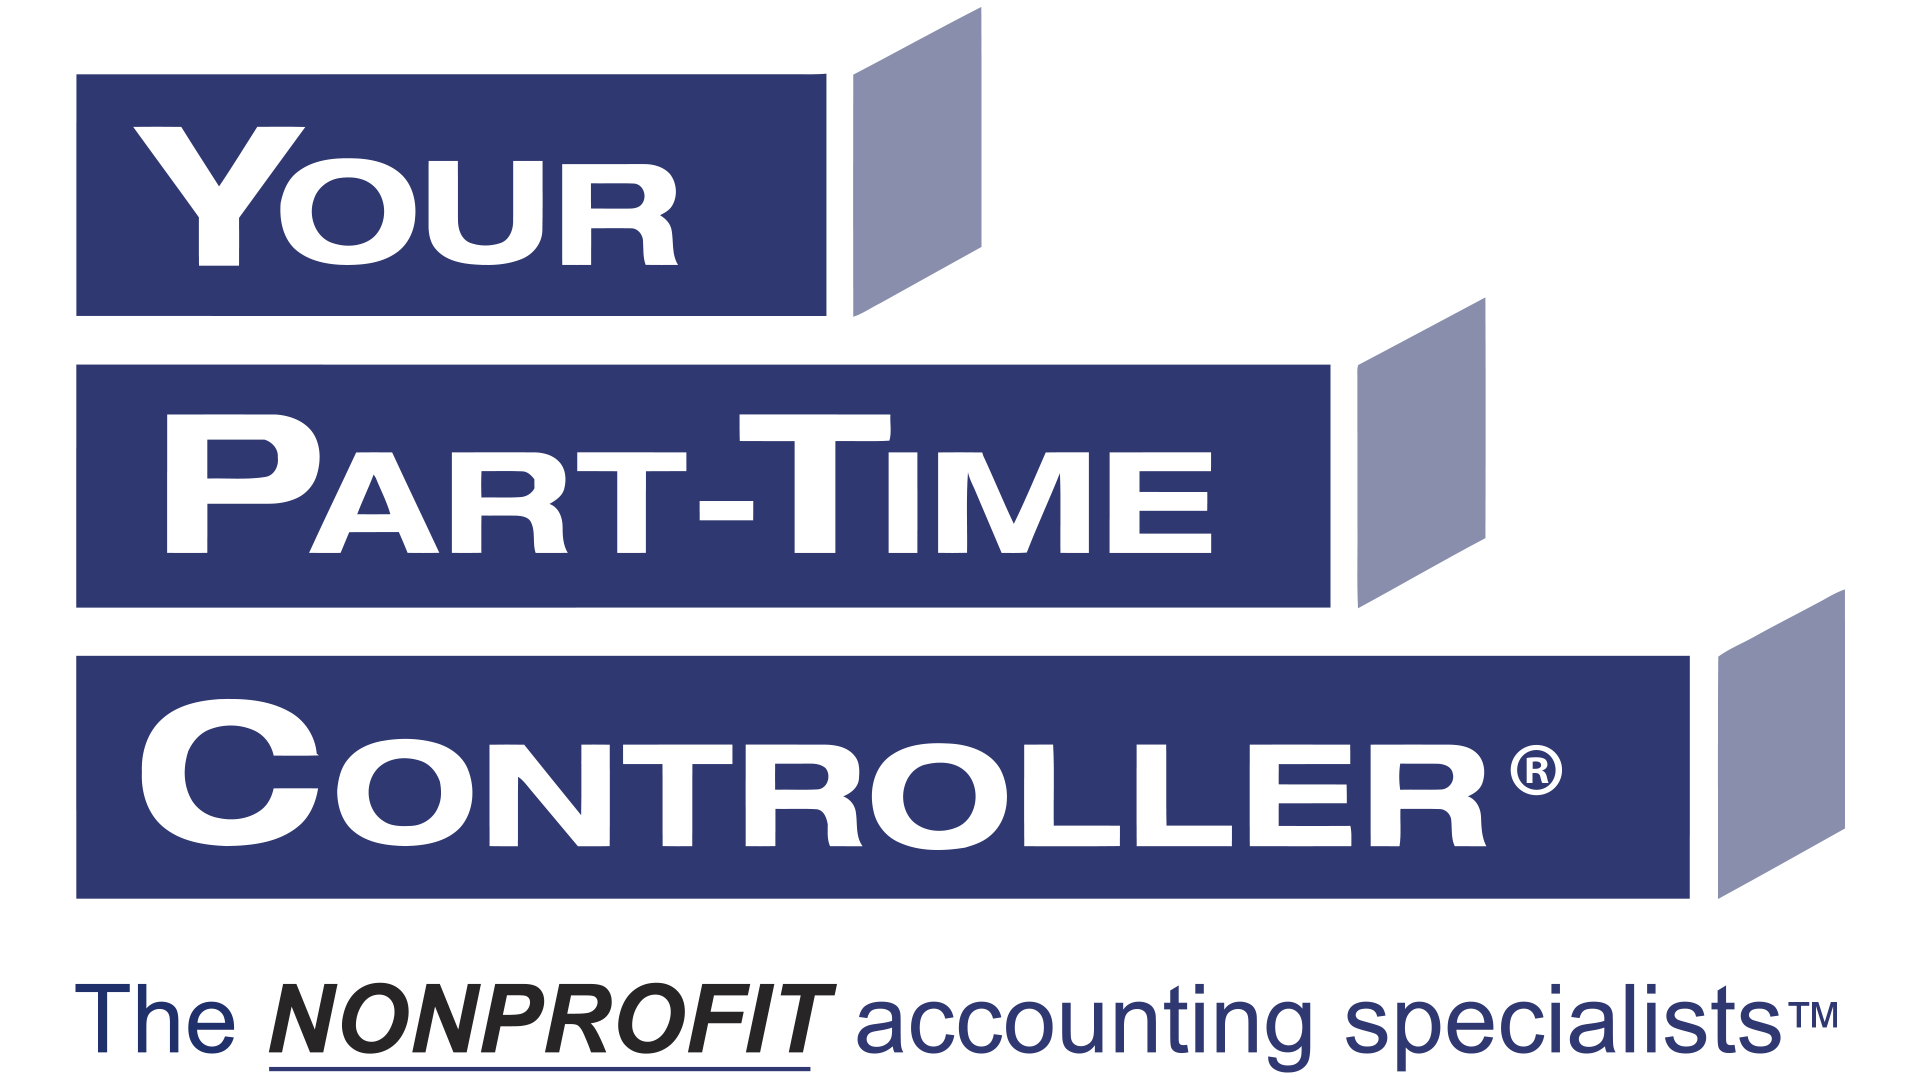 Your Part-Time Controller, The nonprofit accounting specialists!